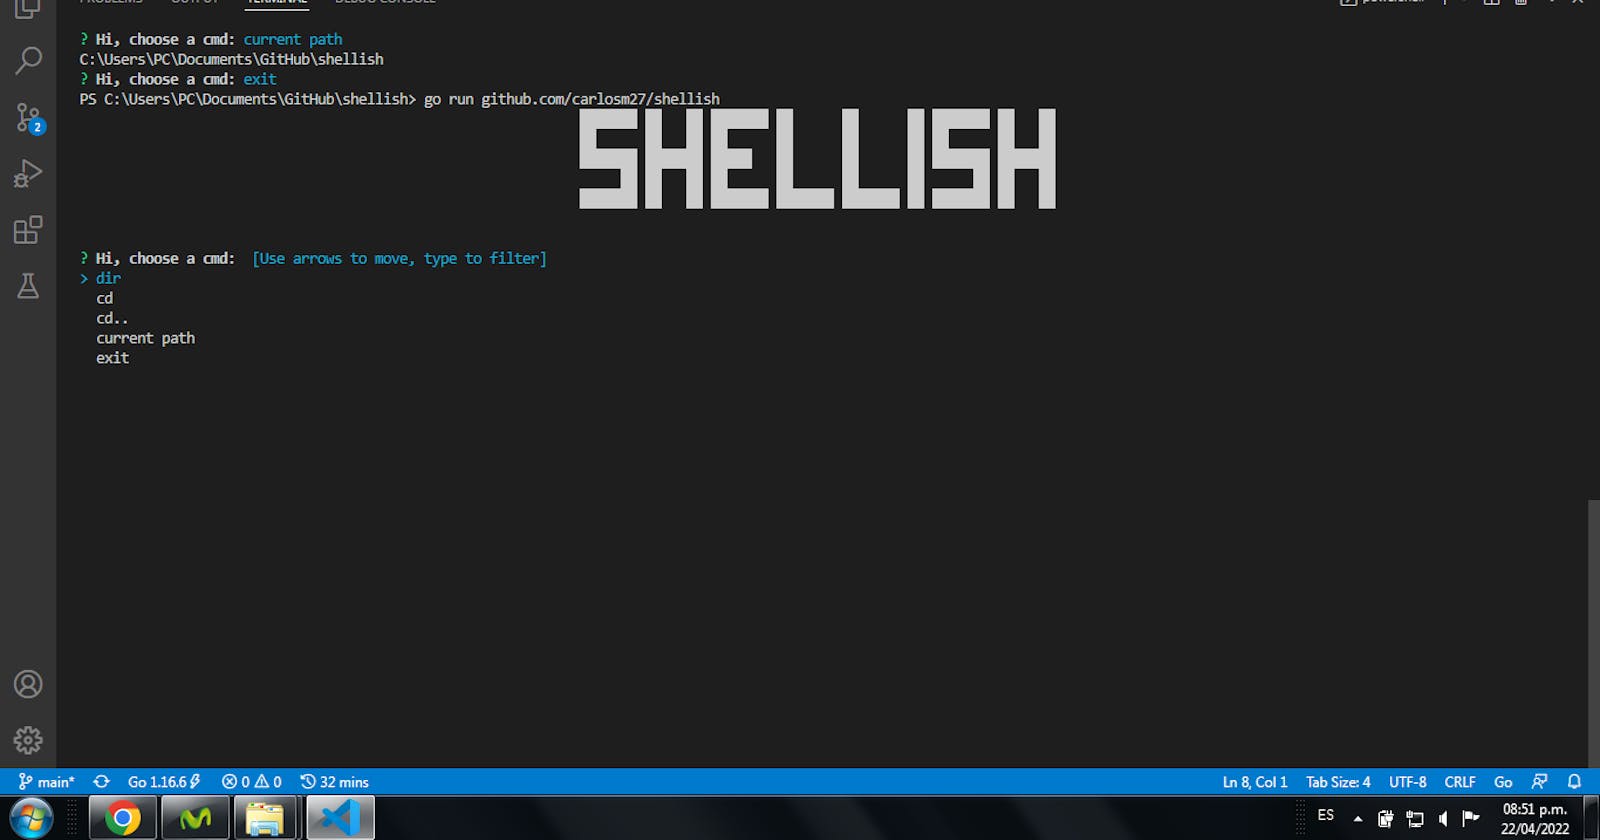 Shellish, a Shell-ish program written in Go using Pterm and Survey packages.